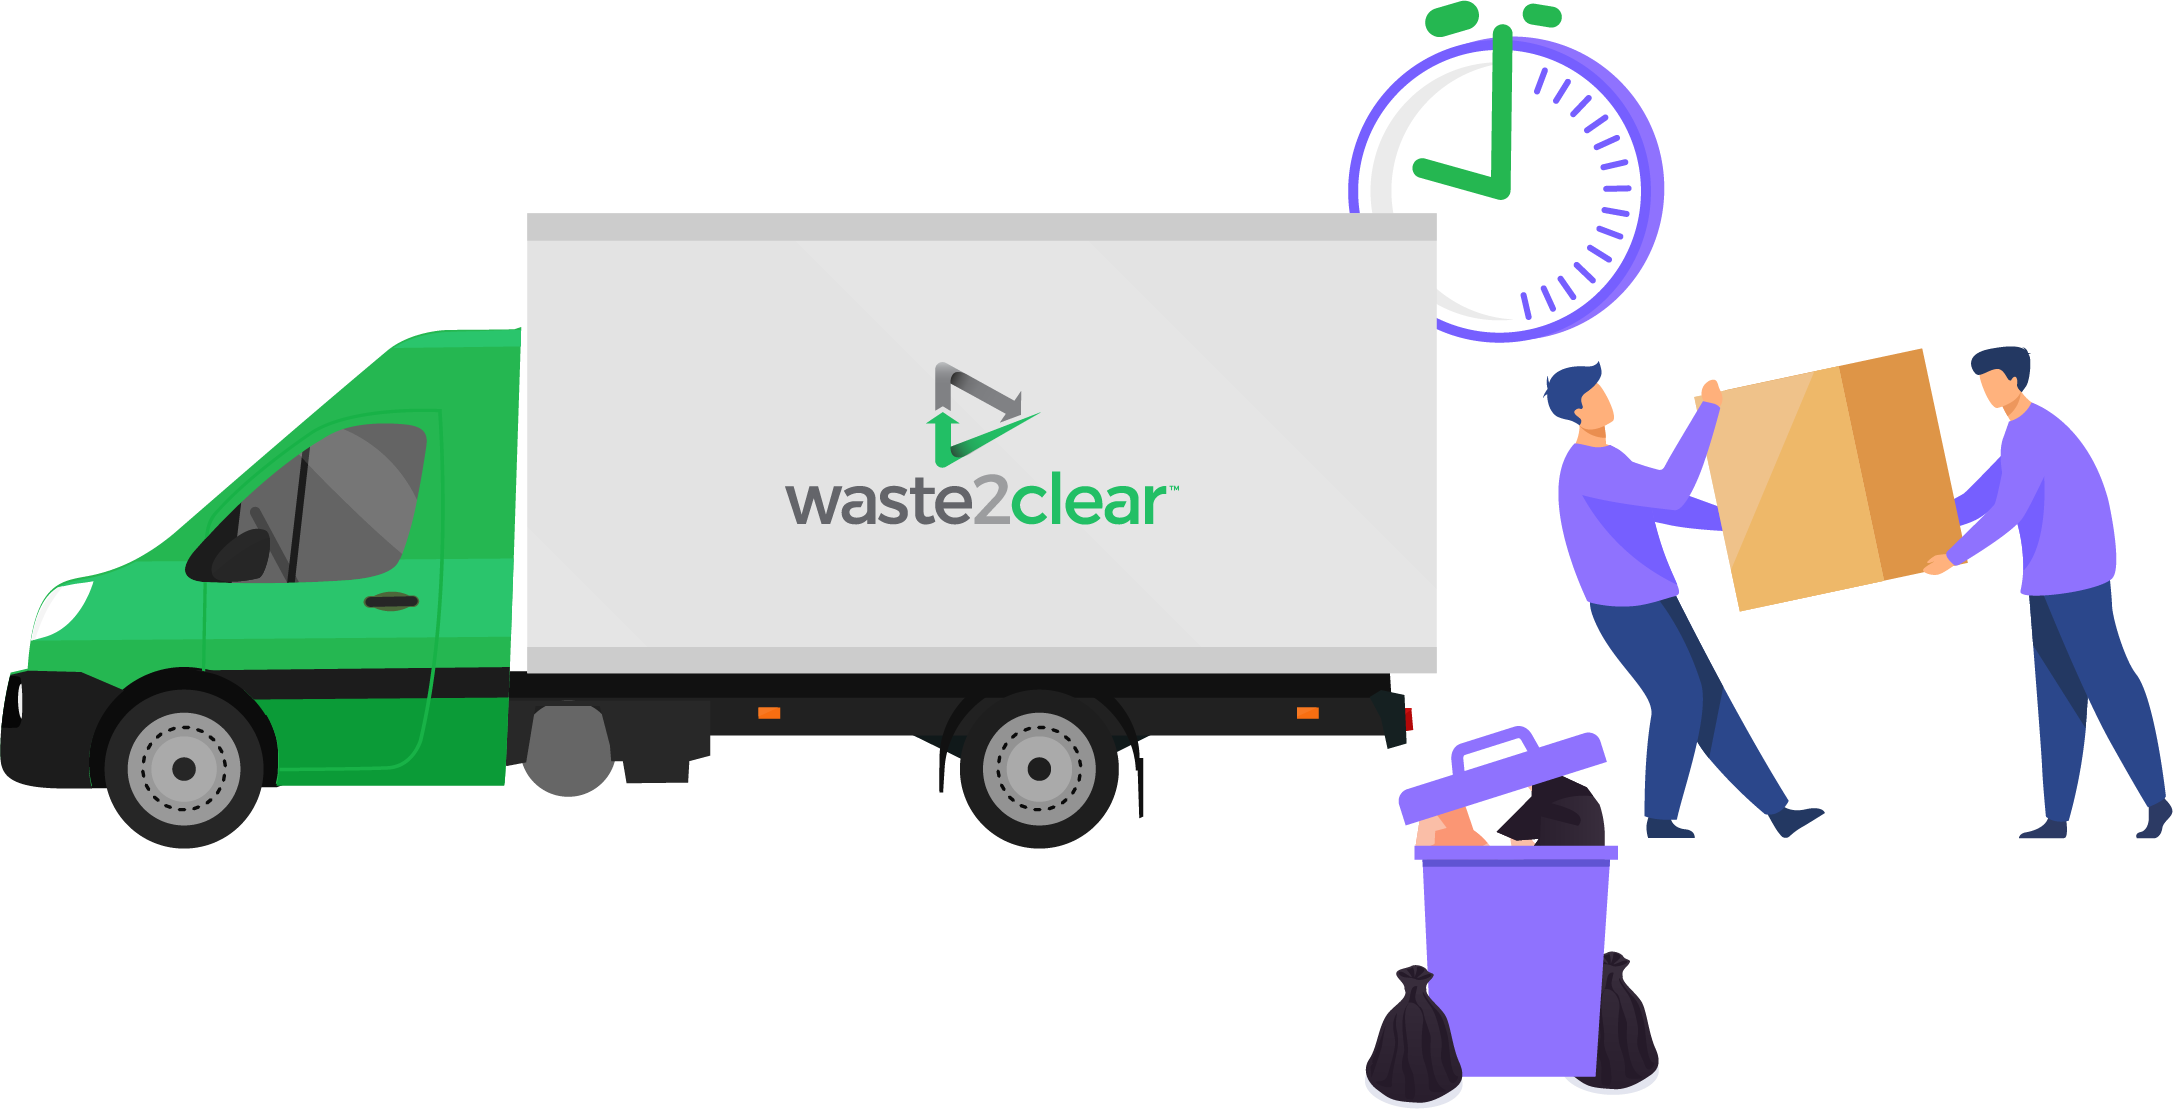 Waste 2 clear, Rubbish Removals Nottingham, Nottingham Rubbish Removal, Rubbish Removal Nottingham, Waste Removal Nottingham, Nottingham Waste Removal, Waste Collection Nottingham, Garage Clearance Nottingham, Sofa Removal Nottingham, Rubbish Collection Nottingham, Free Rubbish Removal Nottingham, Sofa Collection Nottingham